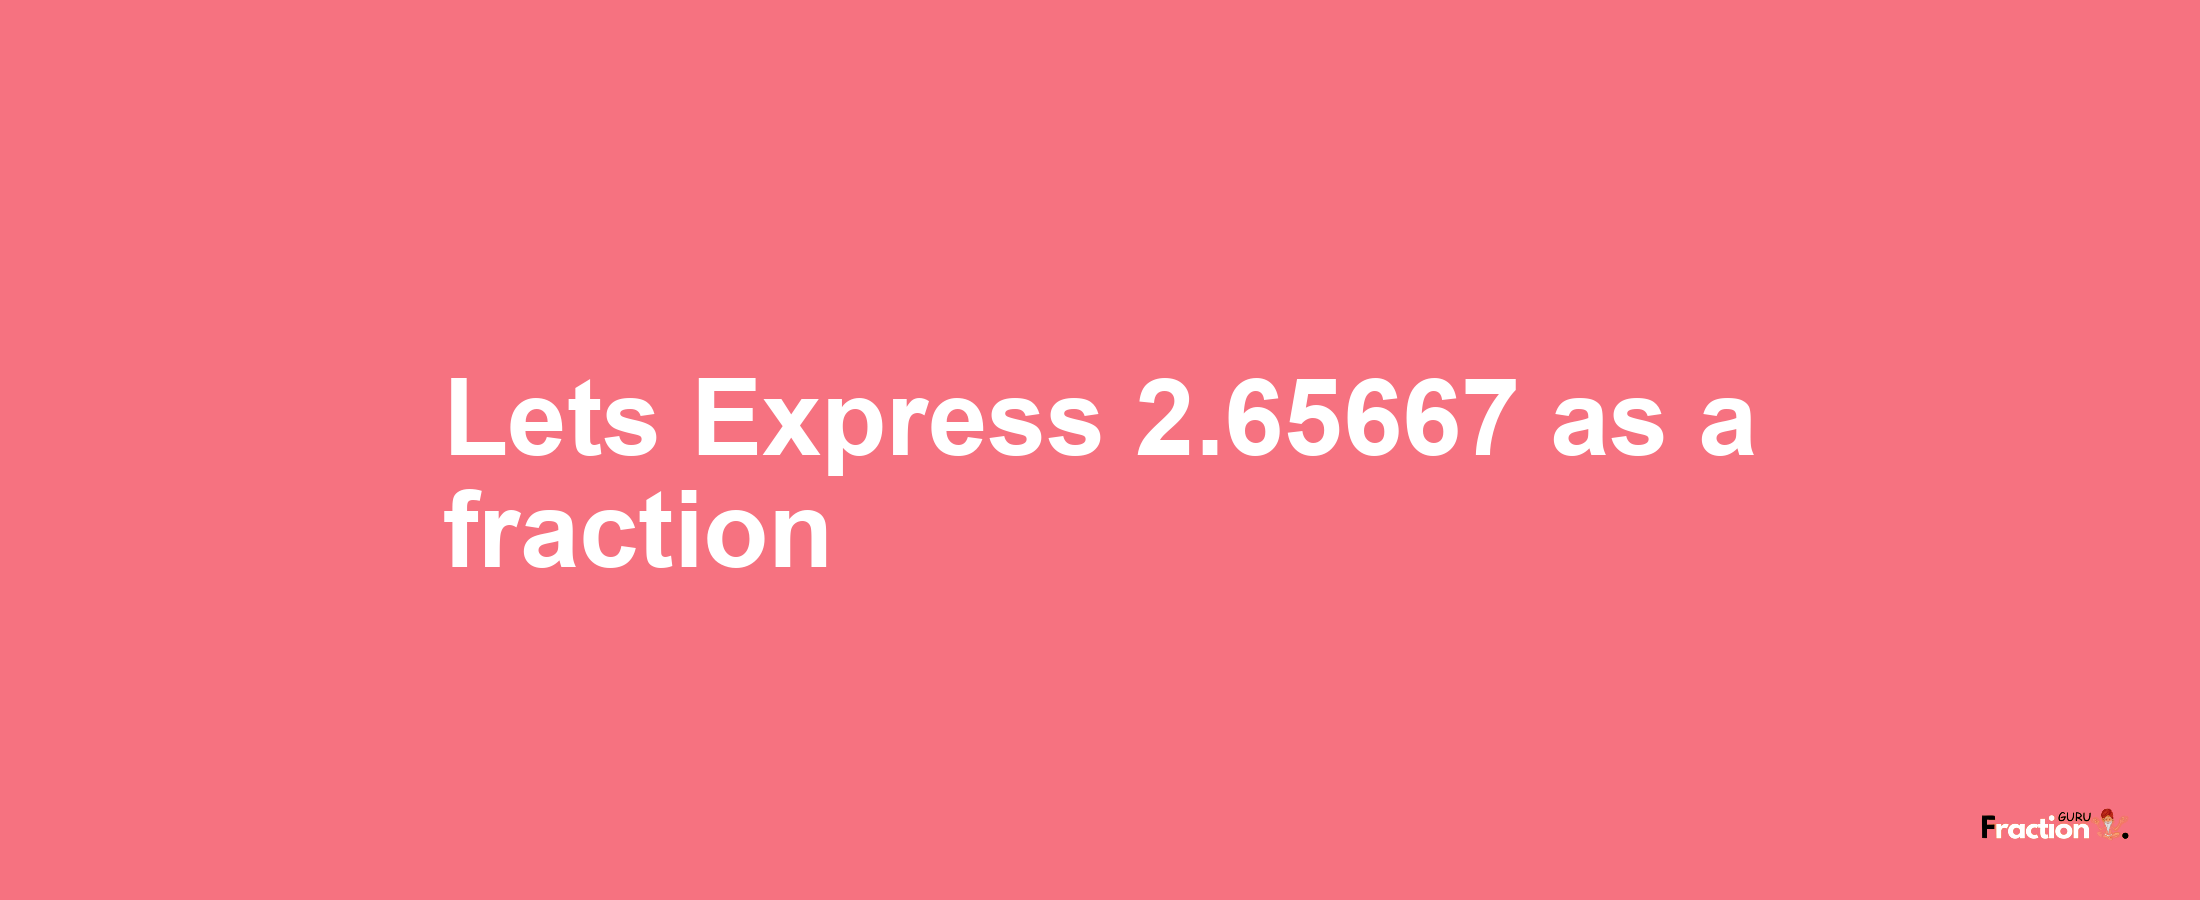 Lets Express 2.65667 as afraction